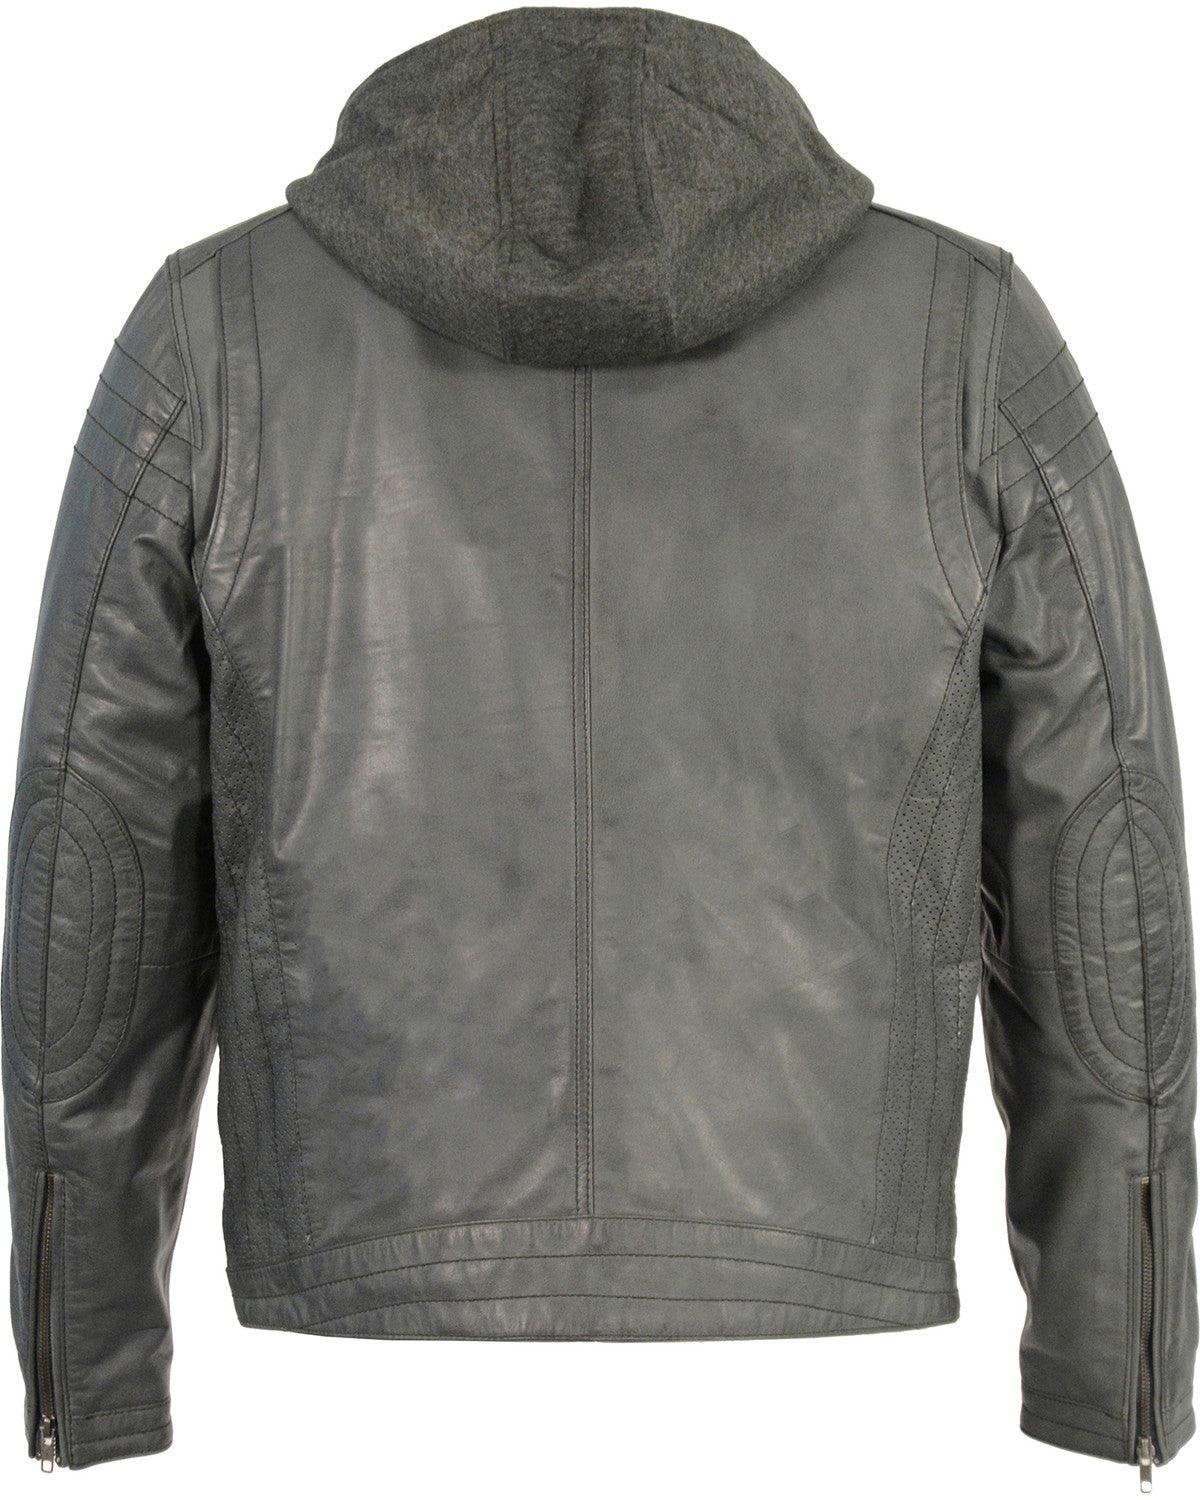 Grey Zipper Front Leather Jacket w/ Removable Hood For Men